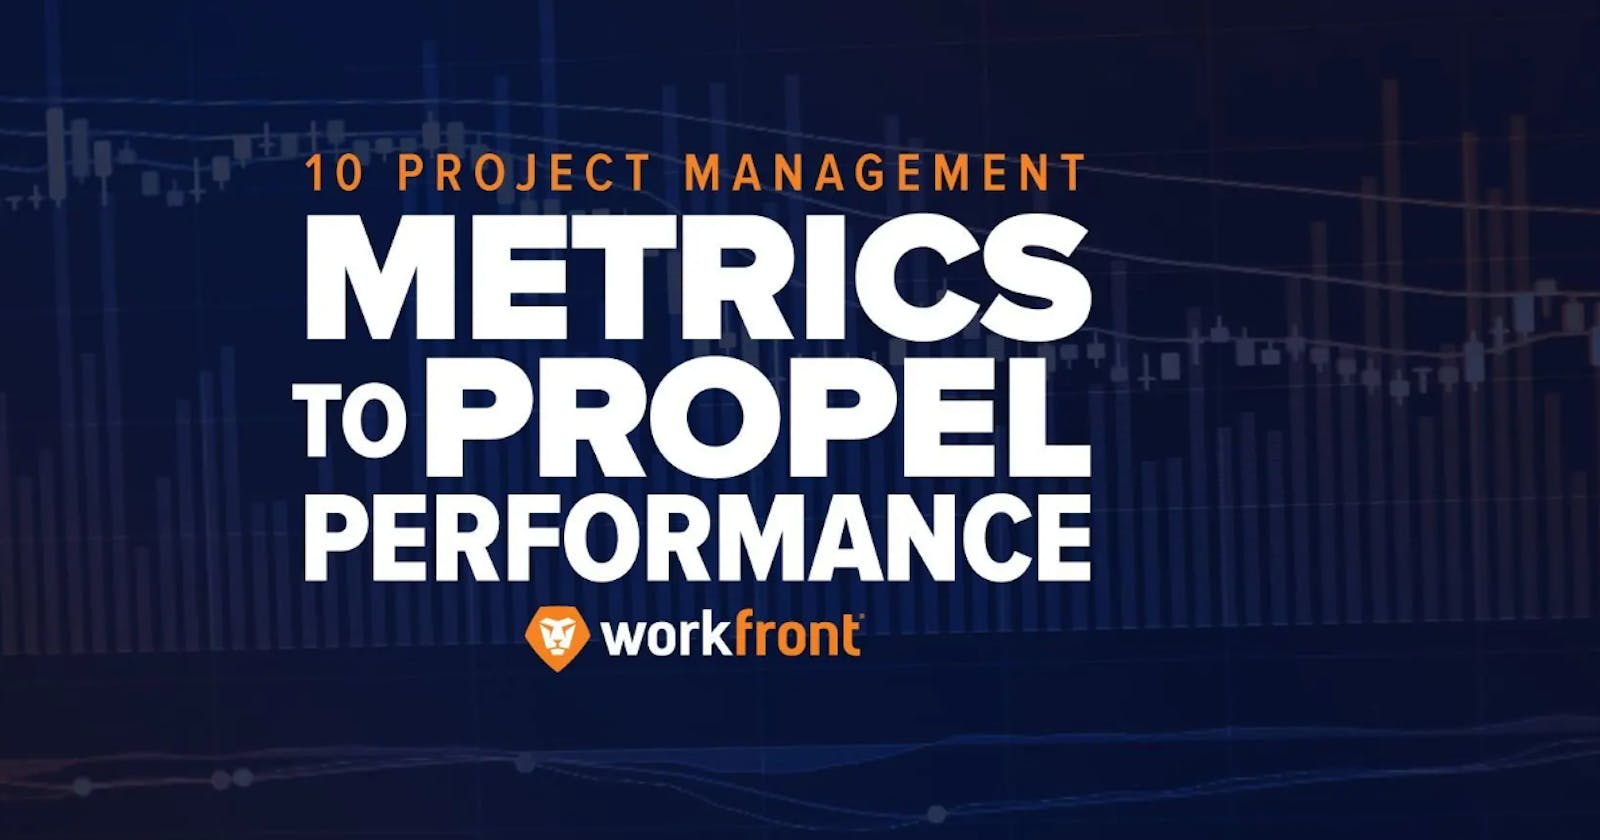 Metrics for Project Management: How to Measure & Track Success